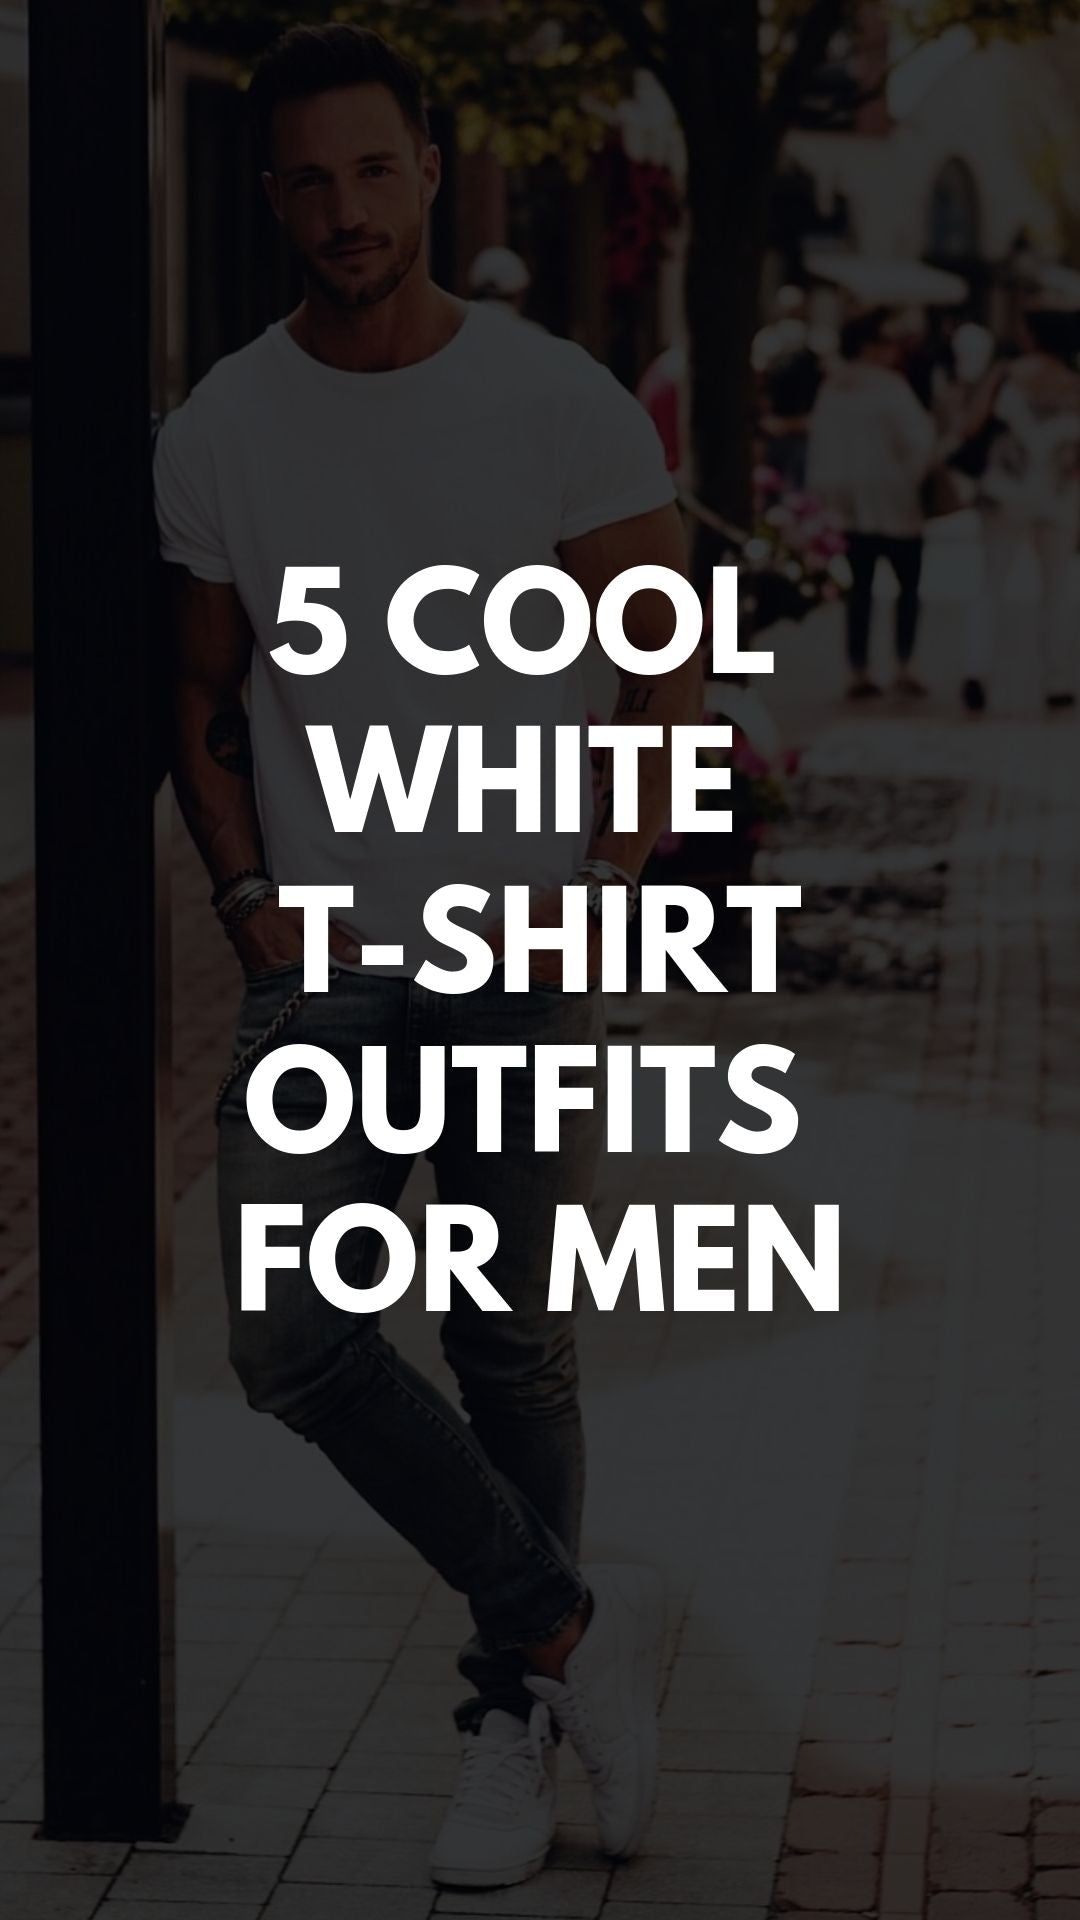 5 COOLEST WHITE T-SHIRT OUTFIT IDEAS FOR MEN